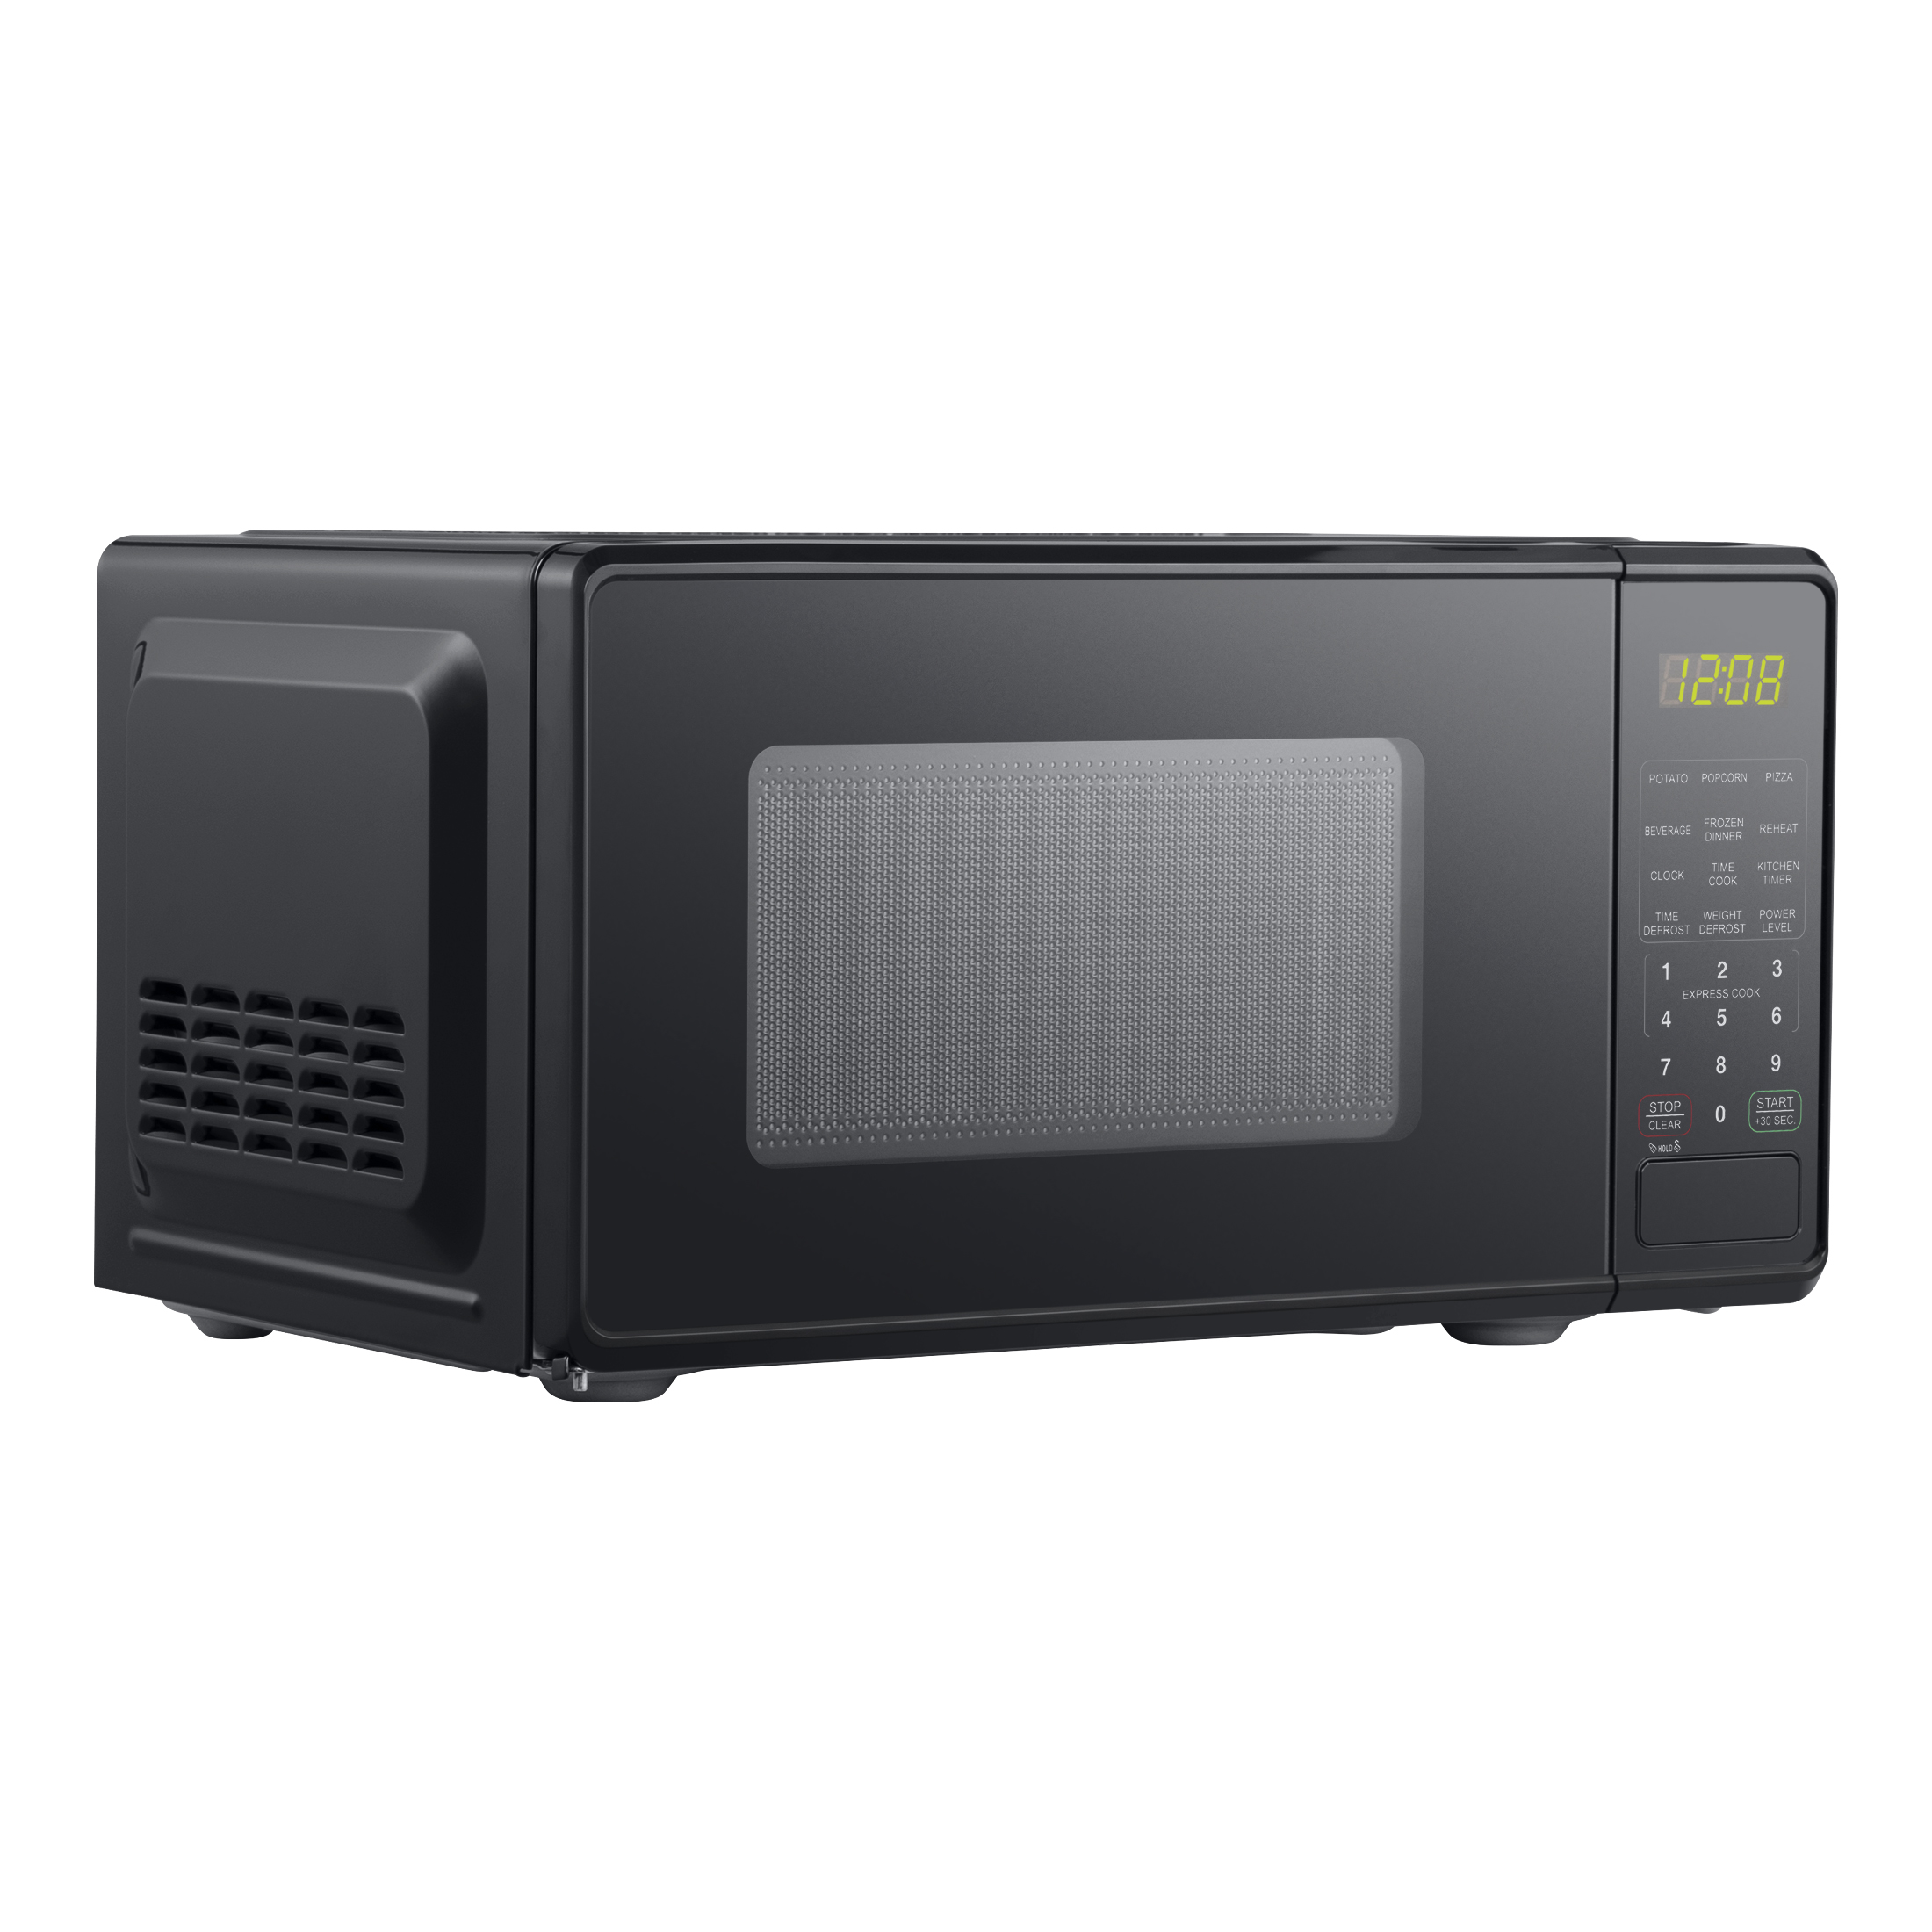 Mainstays 0.7 Cu ft Countertop Microwave Oven, 700 Watts, Black, New - image 5 of 10